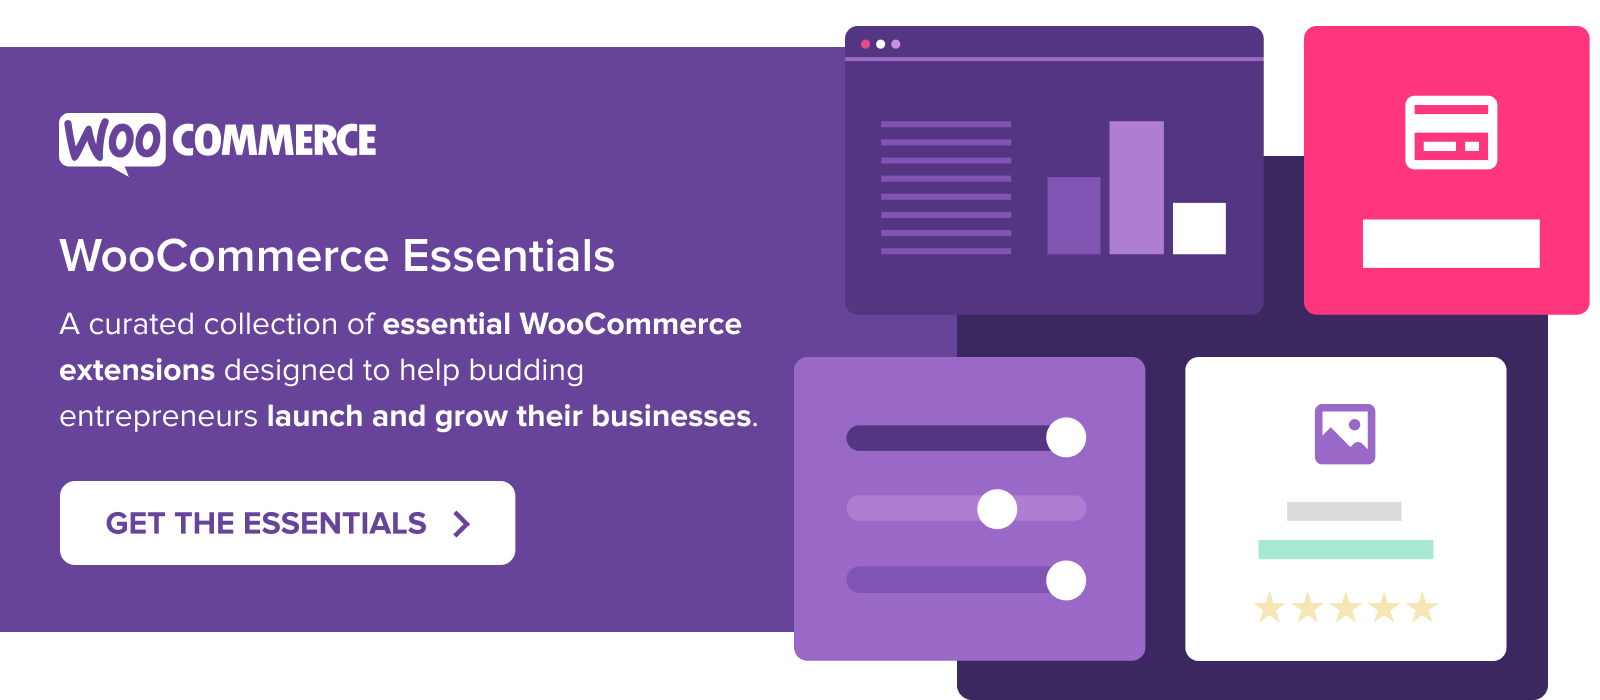 Launch and grow your business with WooCommerce Essentials